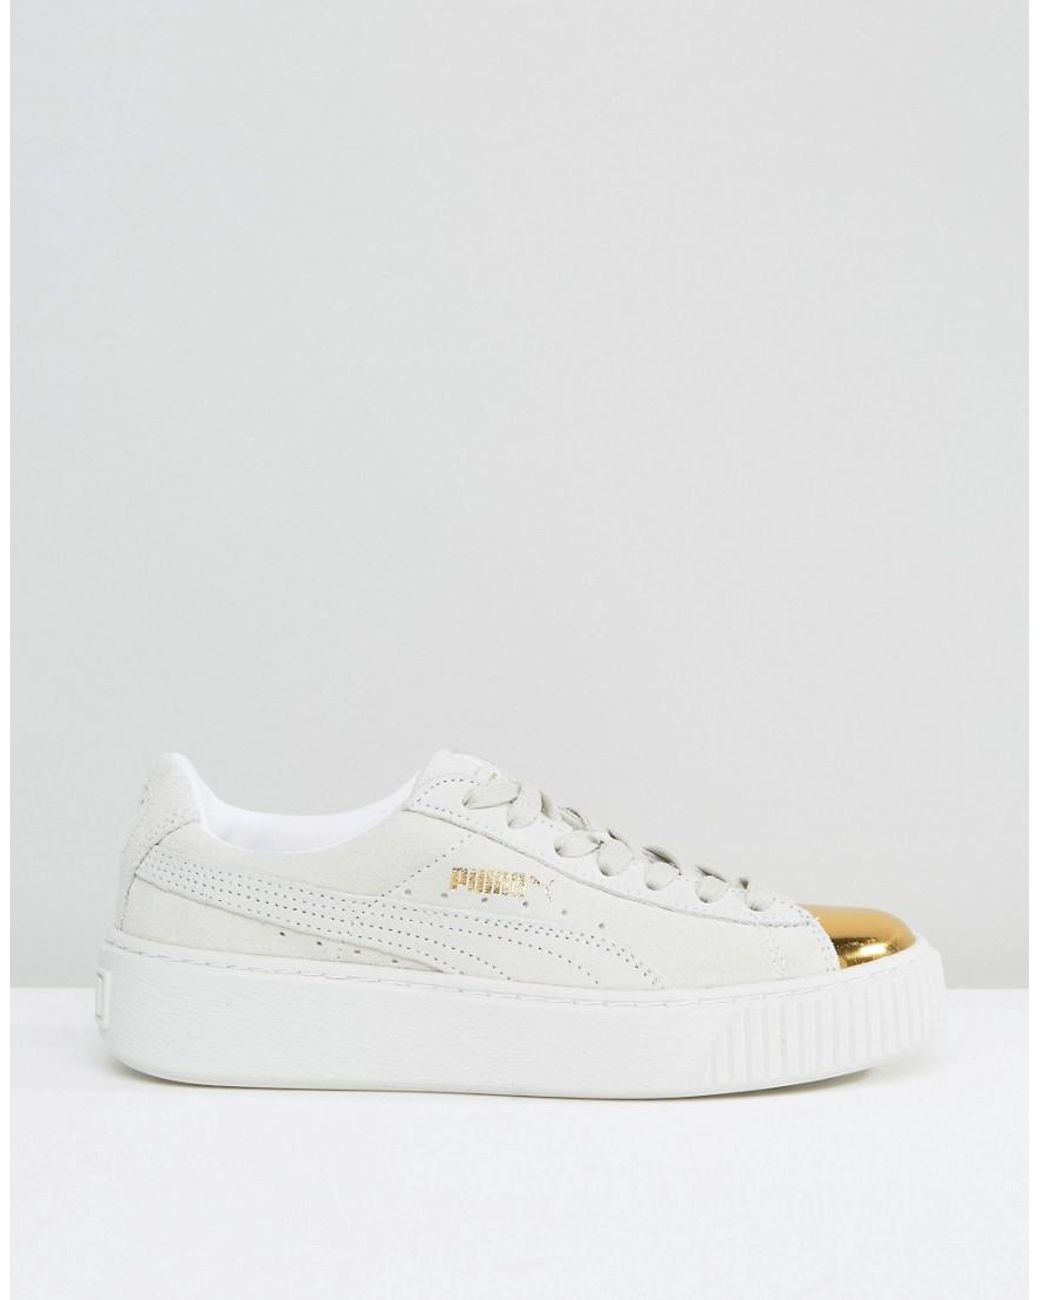 PUMA Suede Platform Trainers In White With Gold Toe Cap | Lyst